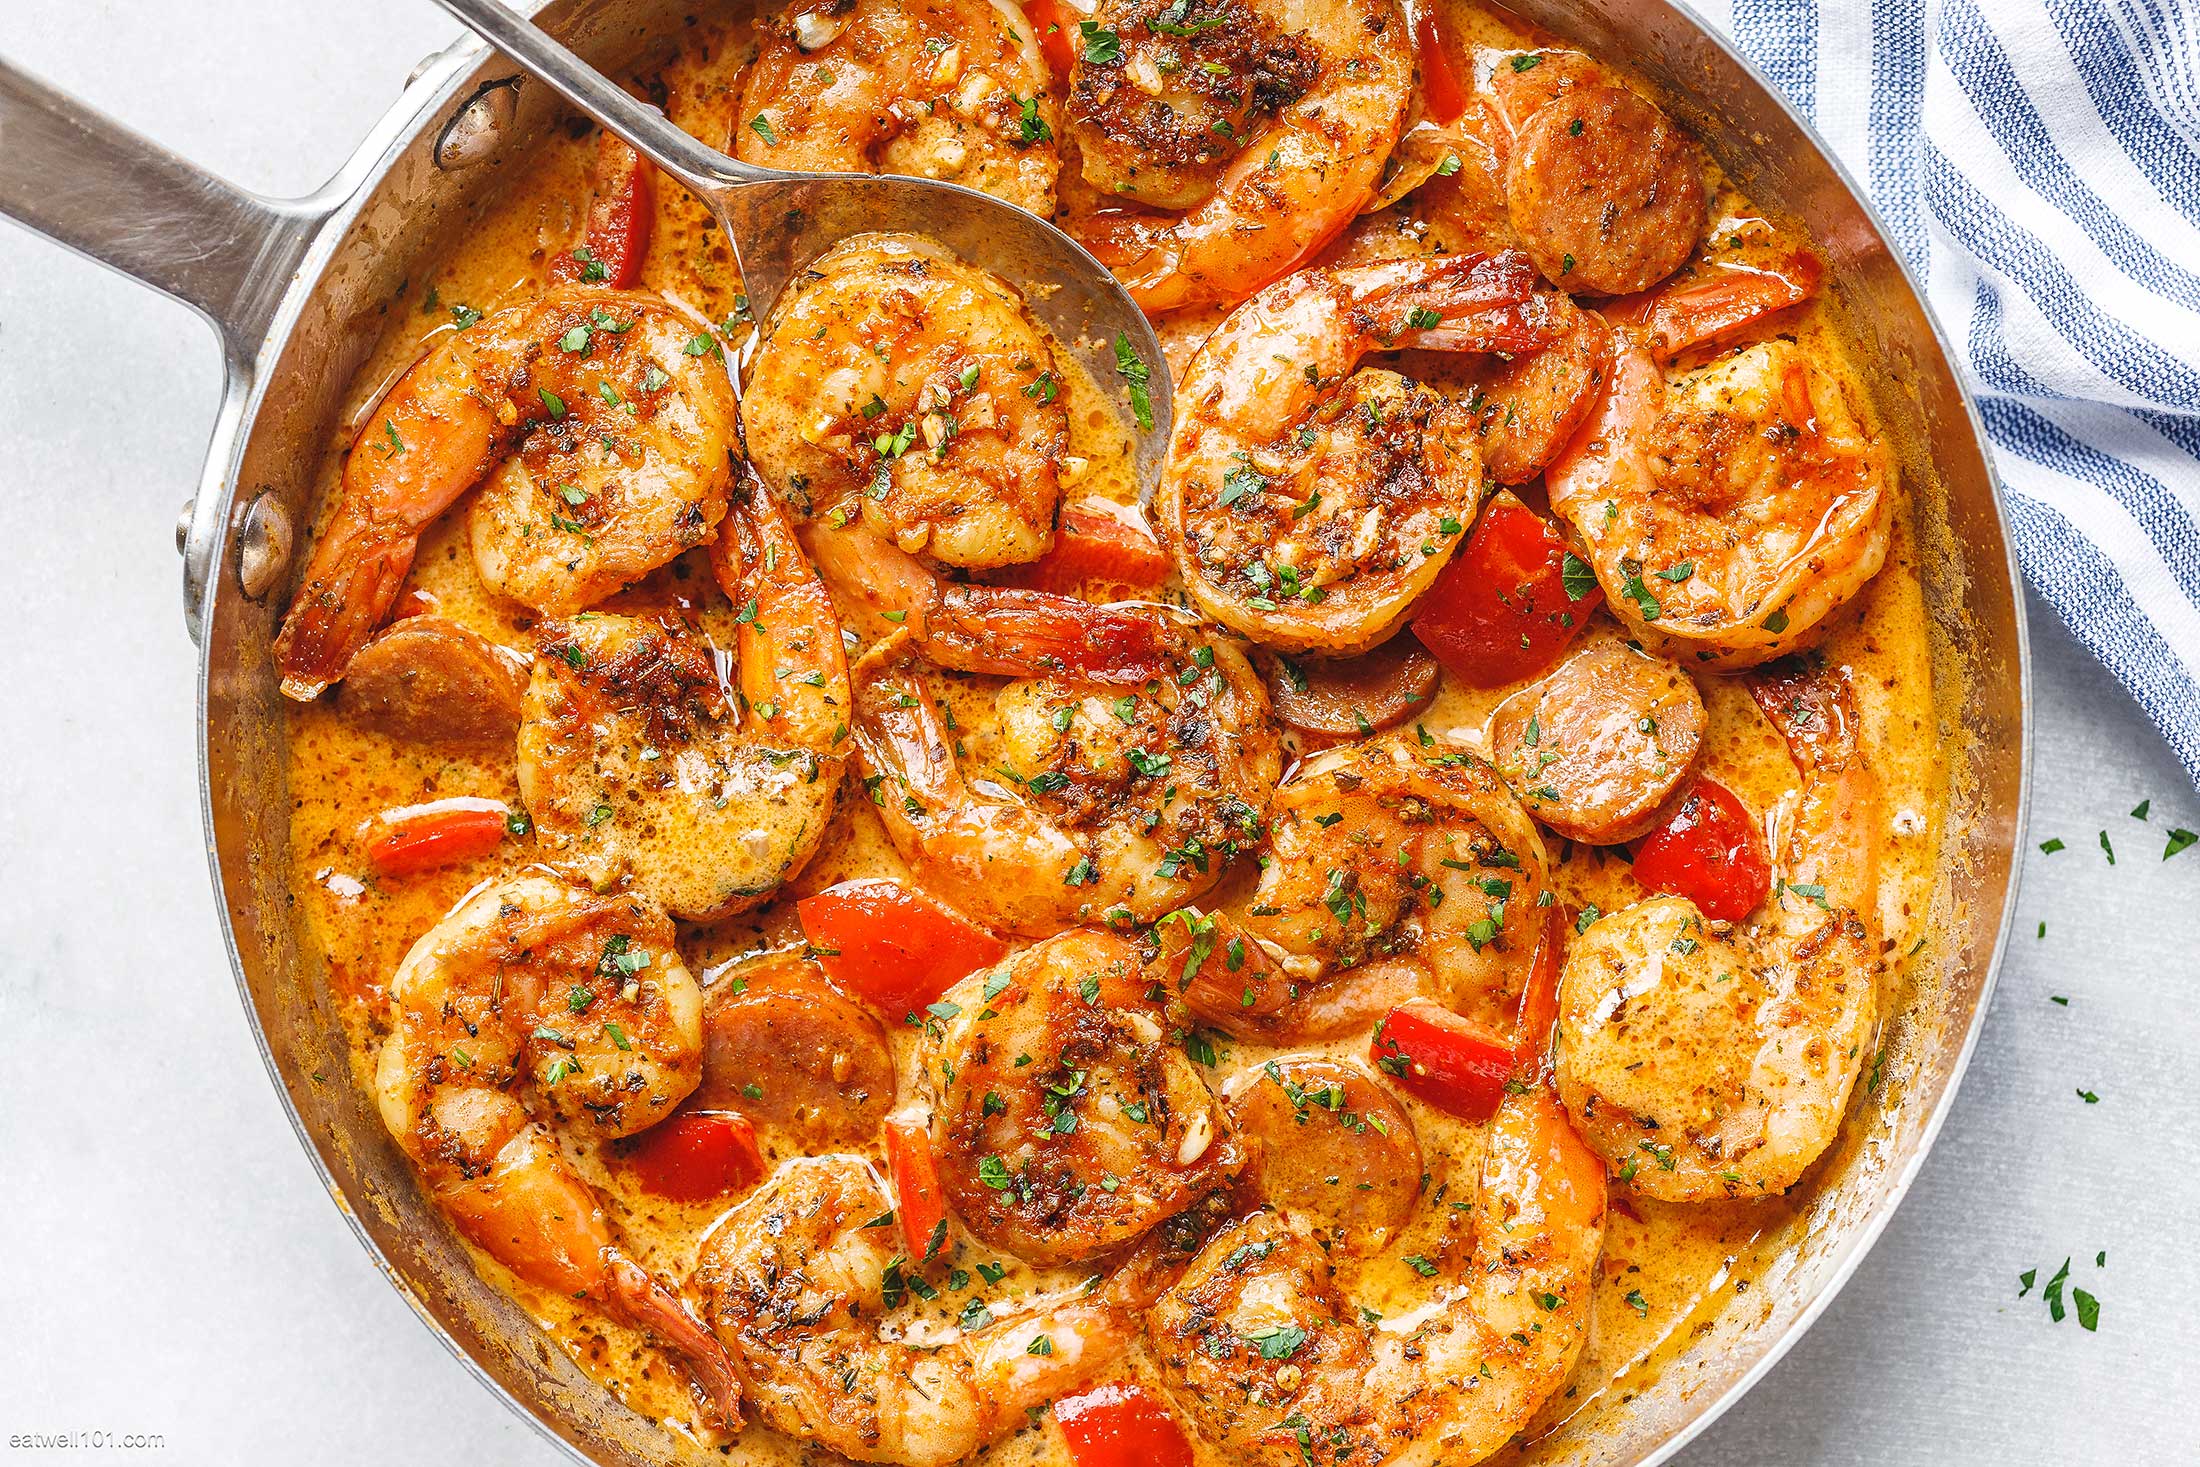 10 Delicious Cajun-Inspired Recipes You’ll Want to Make Again and Again